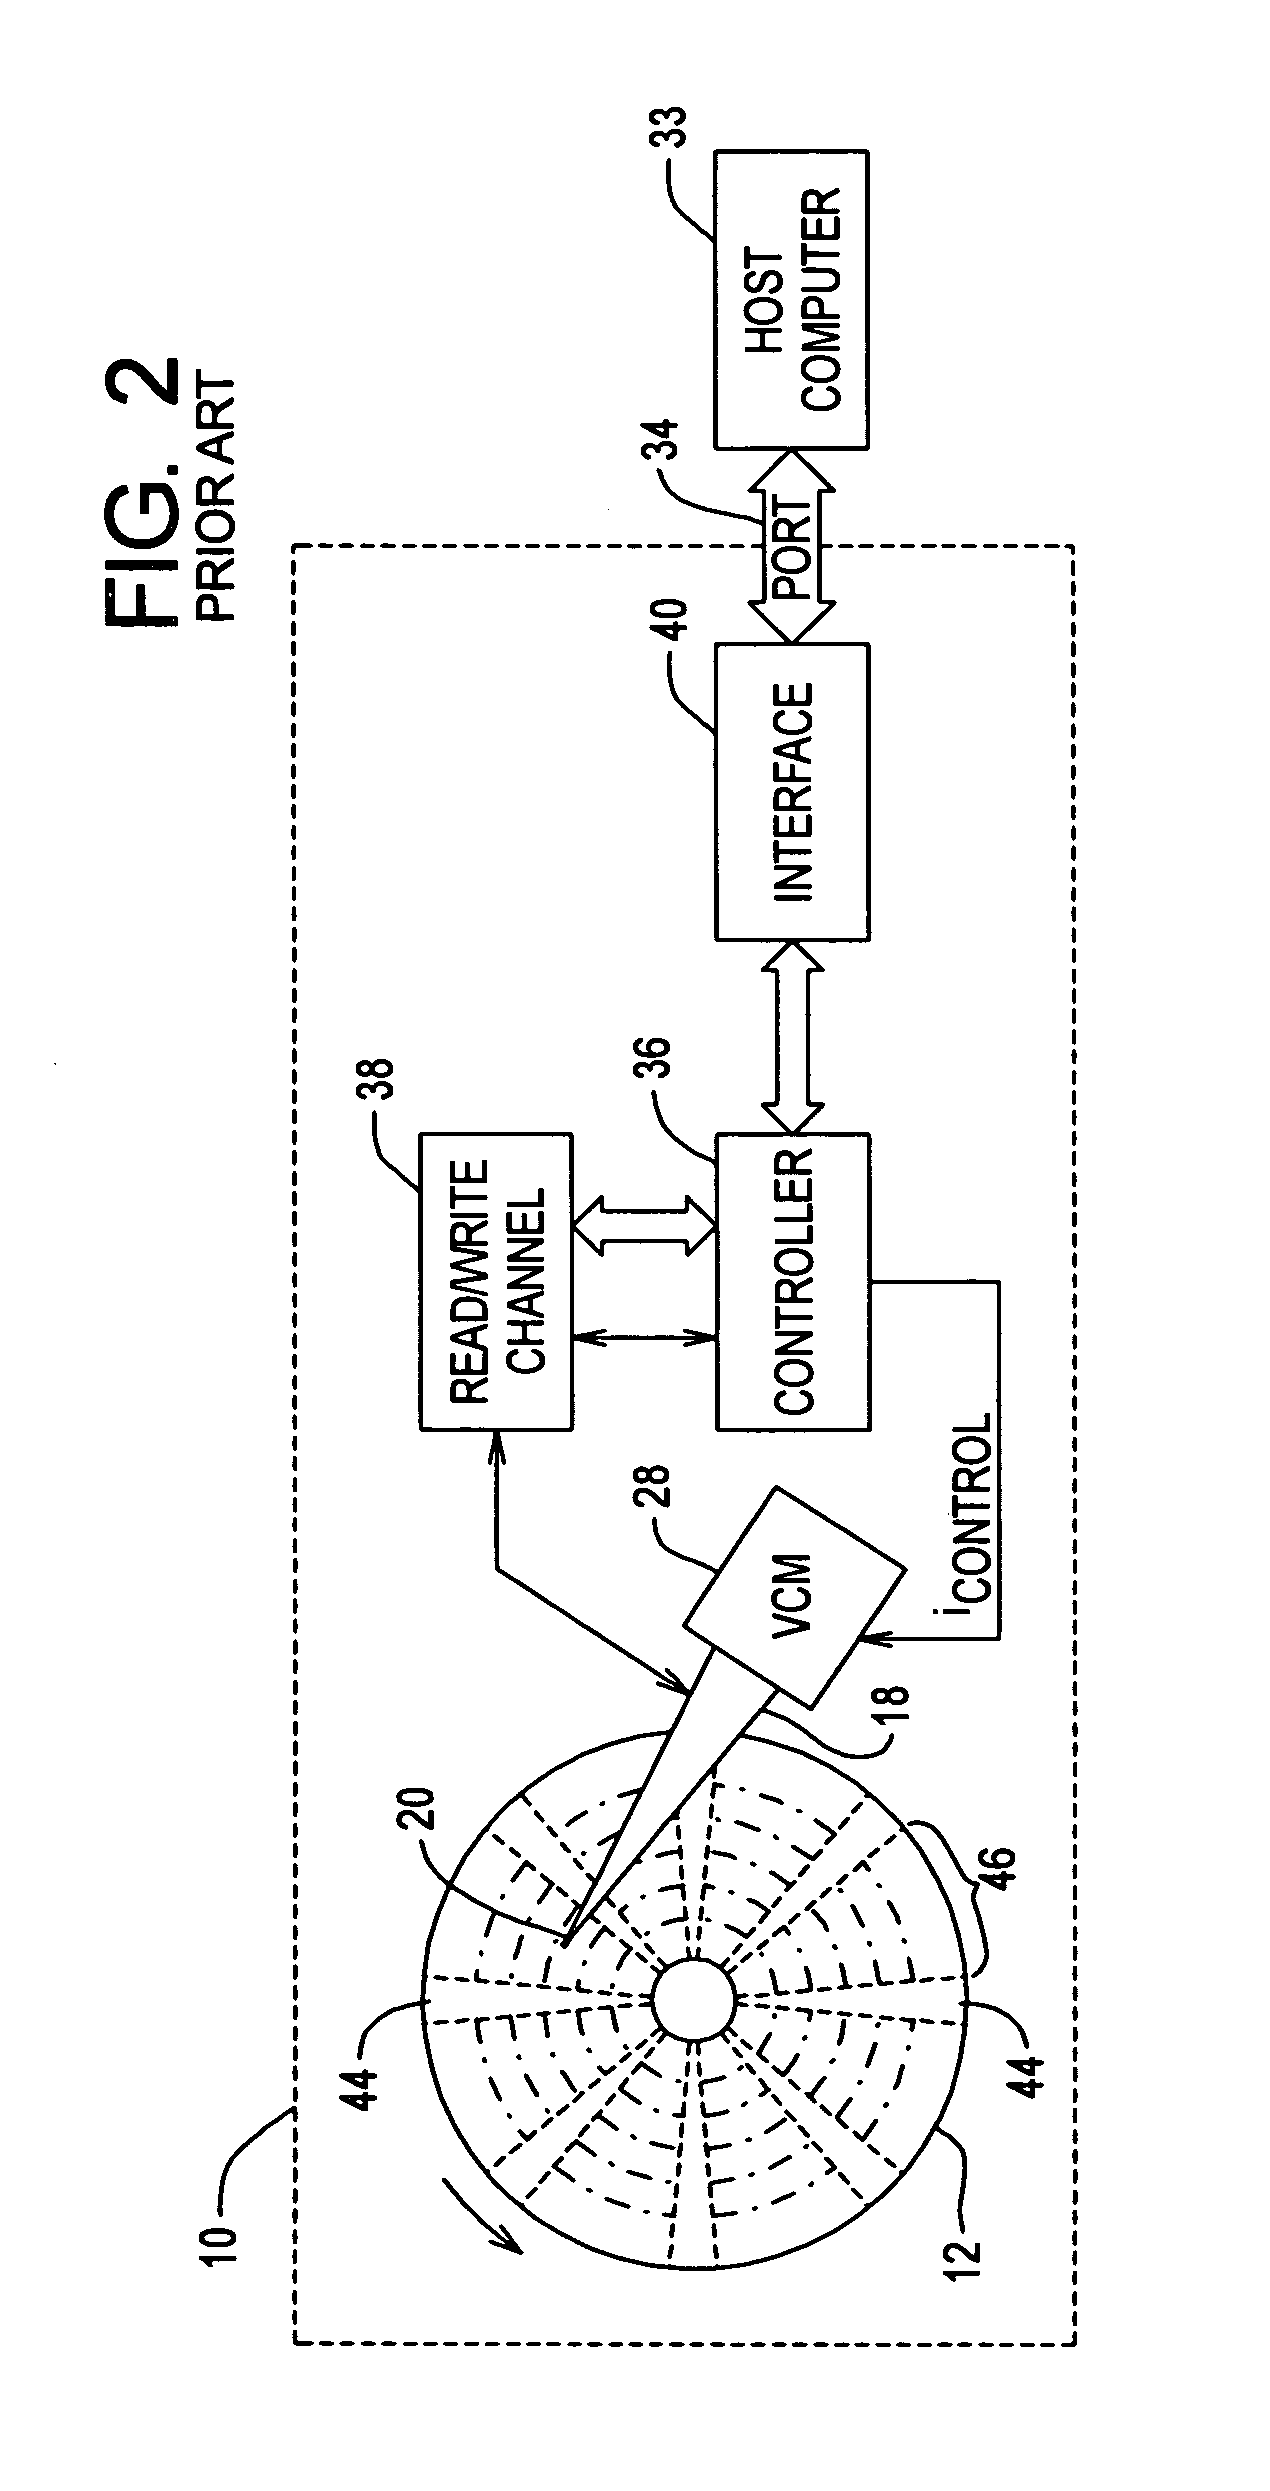 Method and apparatus for dynamic placement of an integration window in a disk drive having a disk surface with spiral servo information written thereon